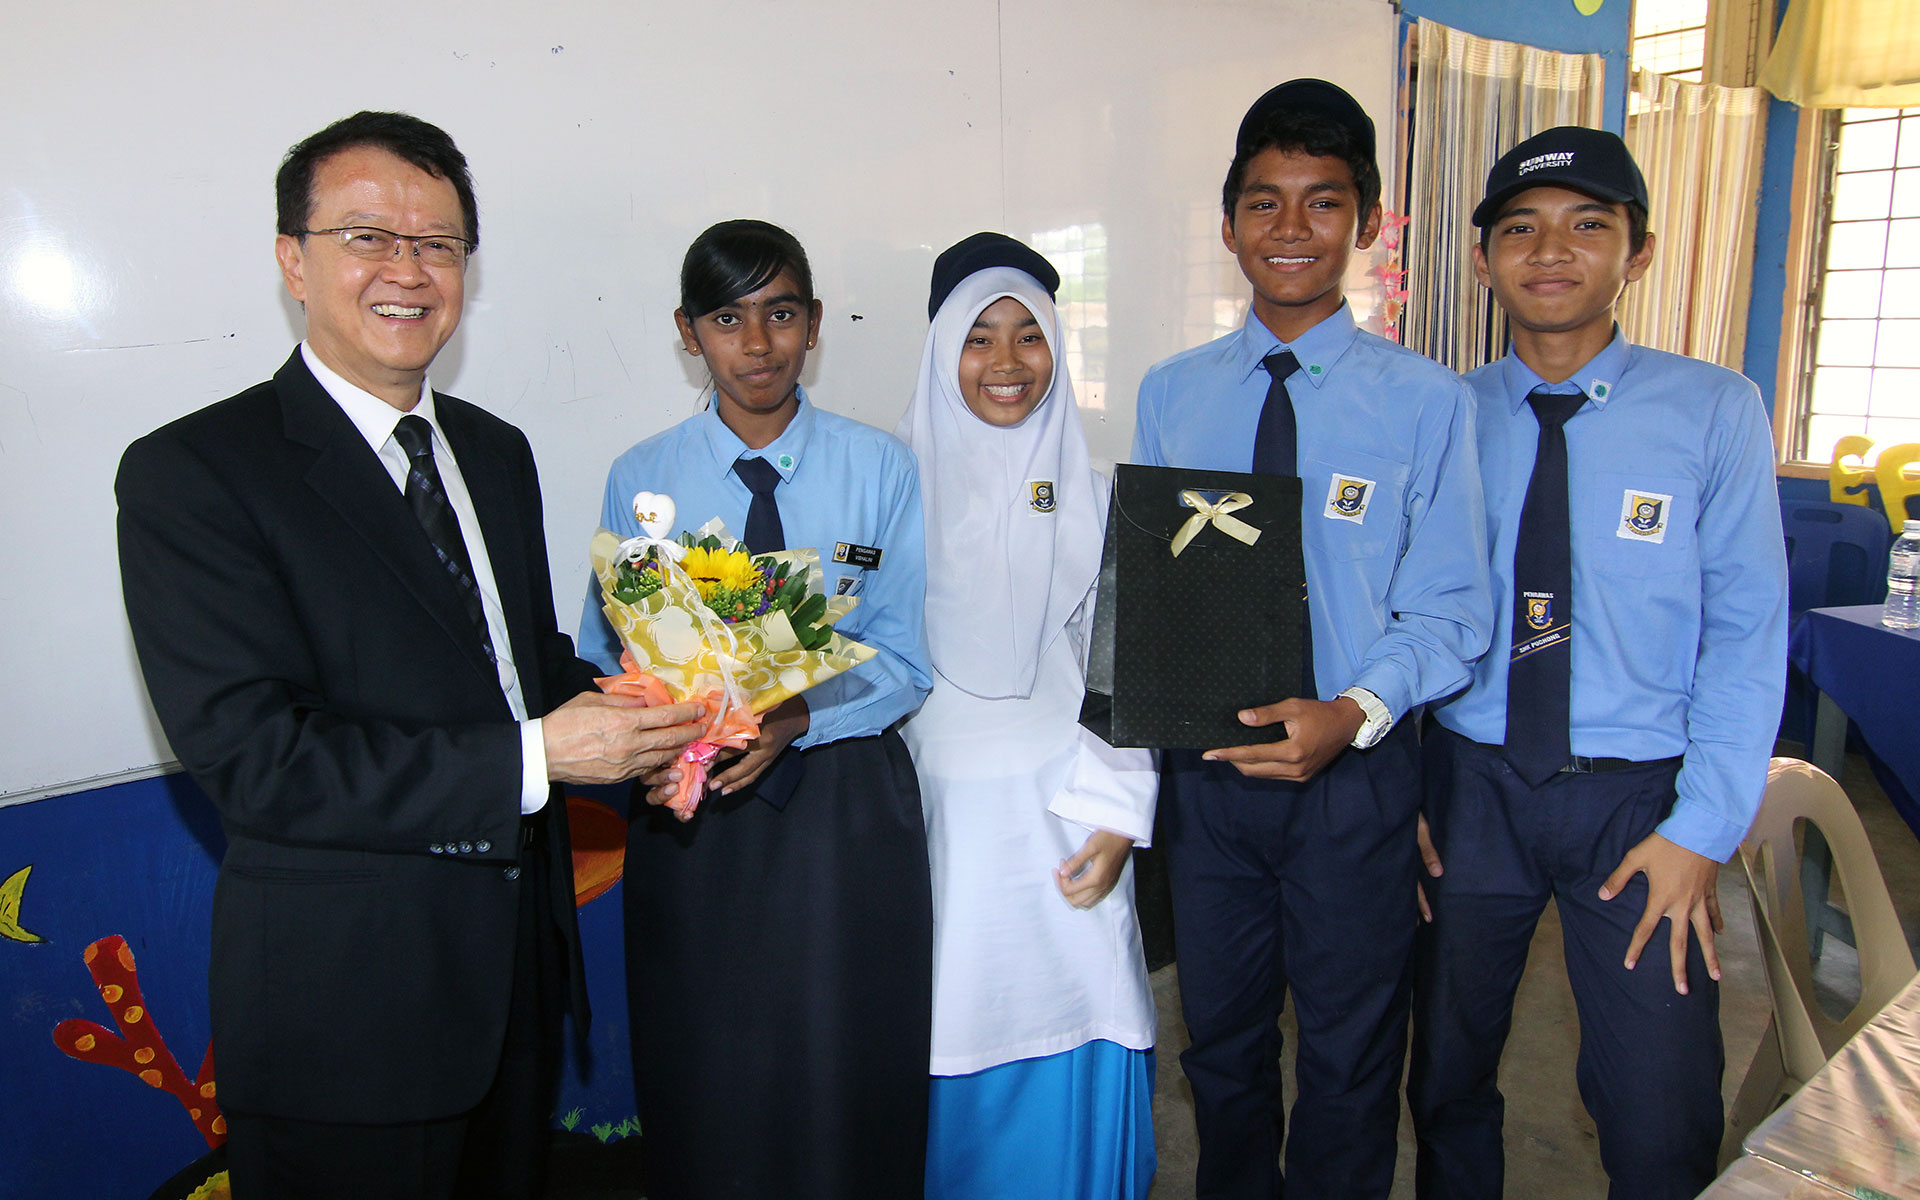 Cheah (left), pictured here with students during Teach for Malaysia week, has been named by Forbes in its “Asia’s Heroes of Philanthropy” list for the fourth time.